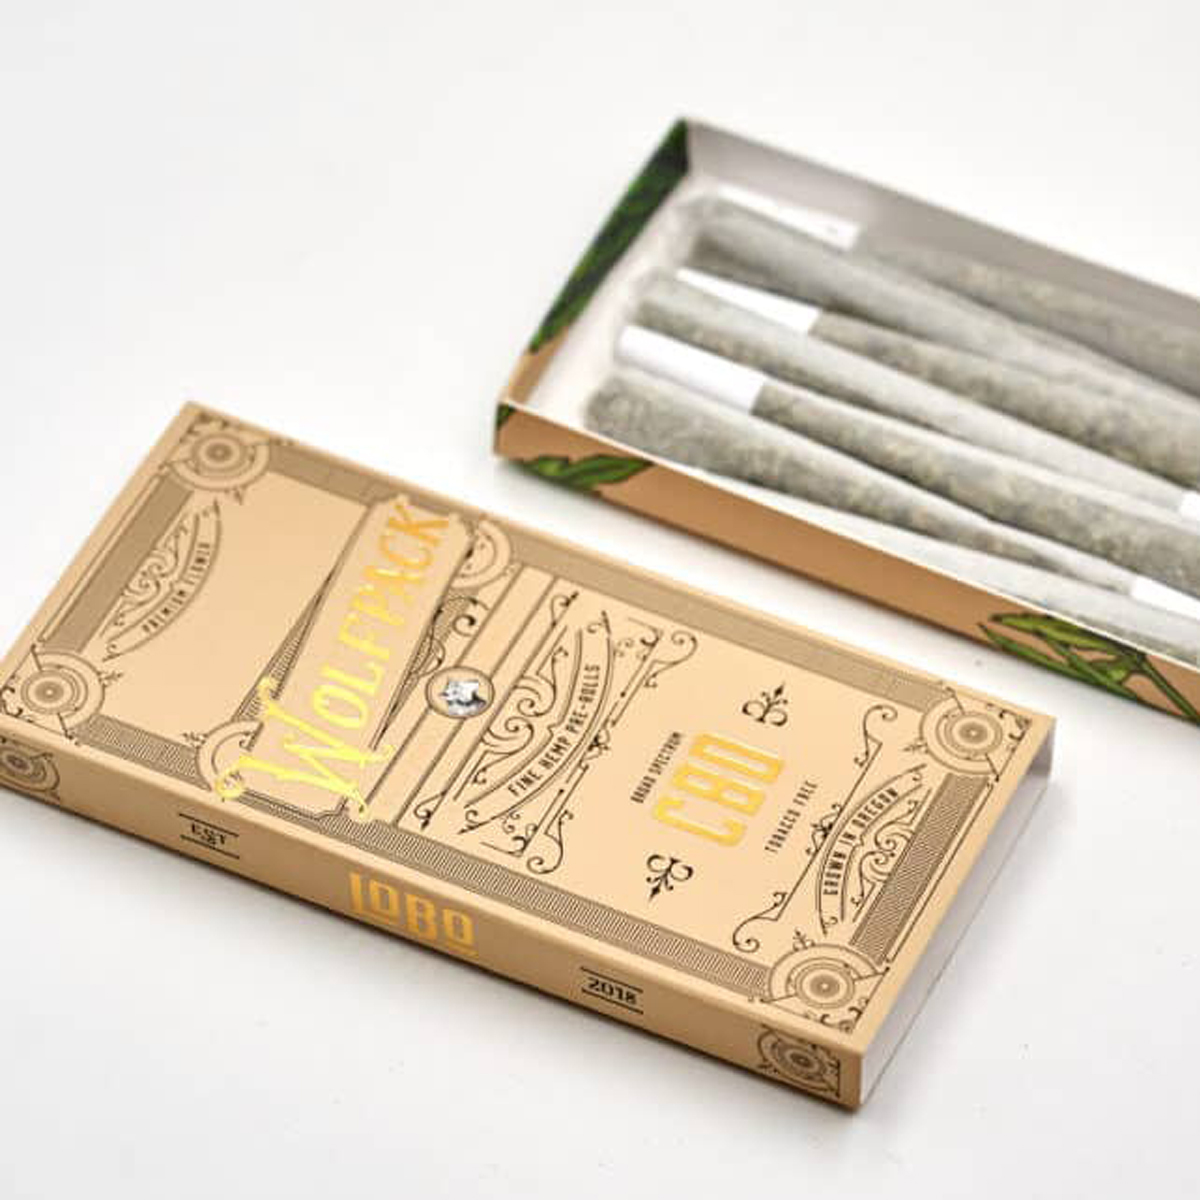 City-Lights-Pre-Roll-Boxes2